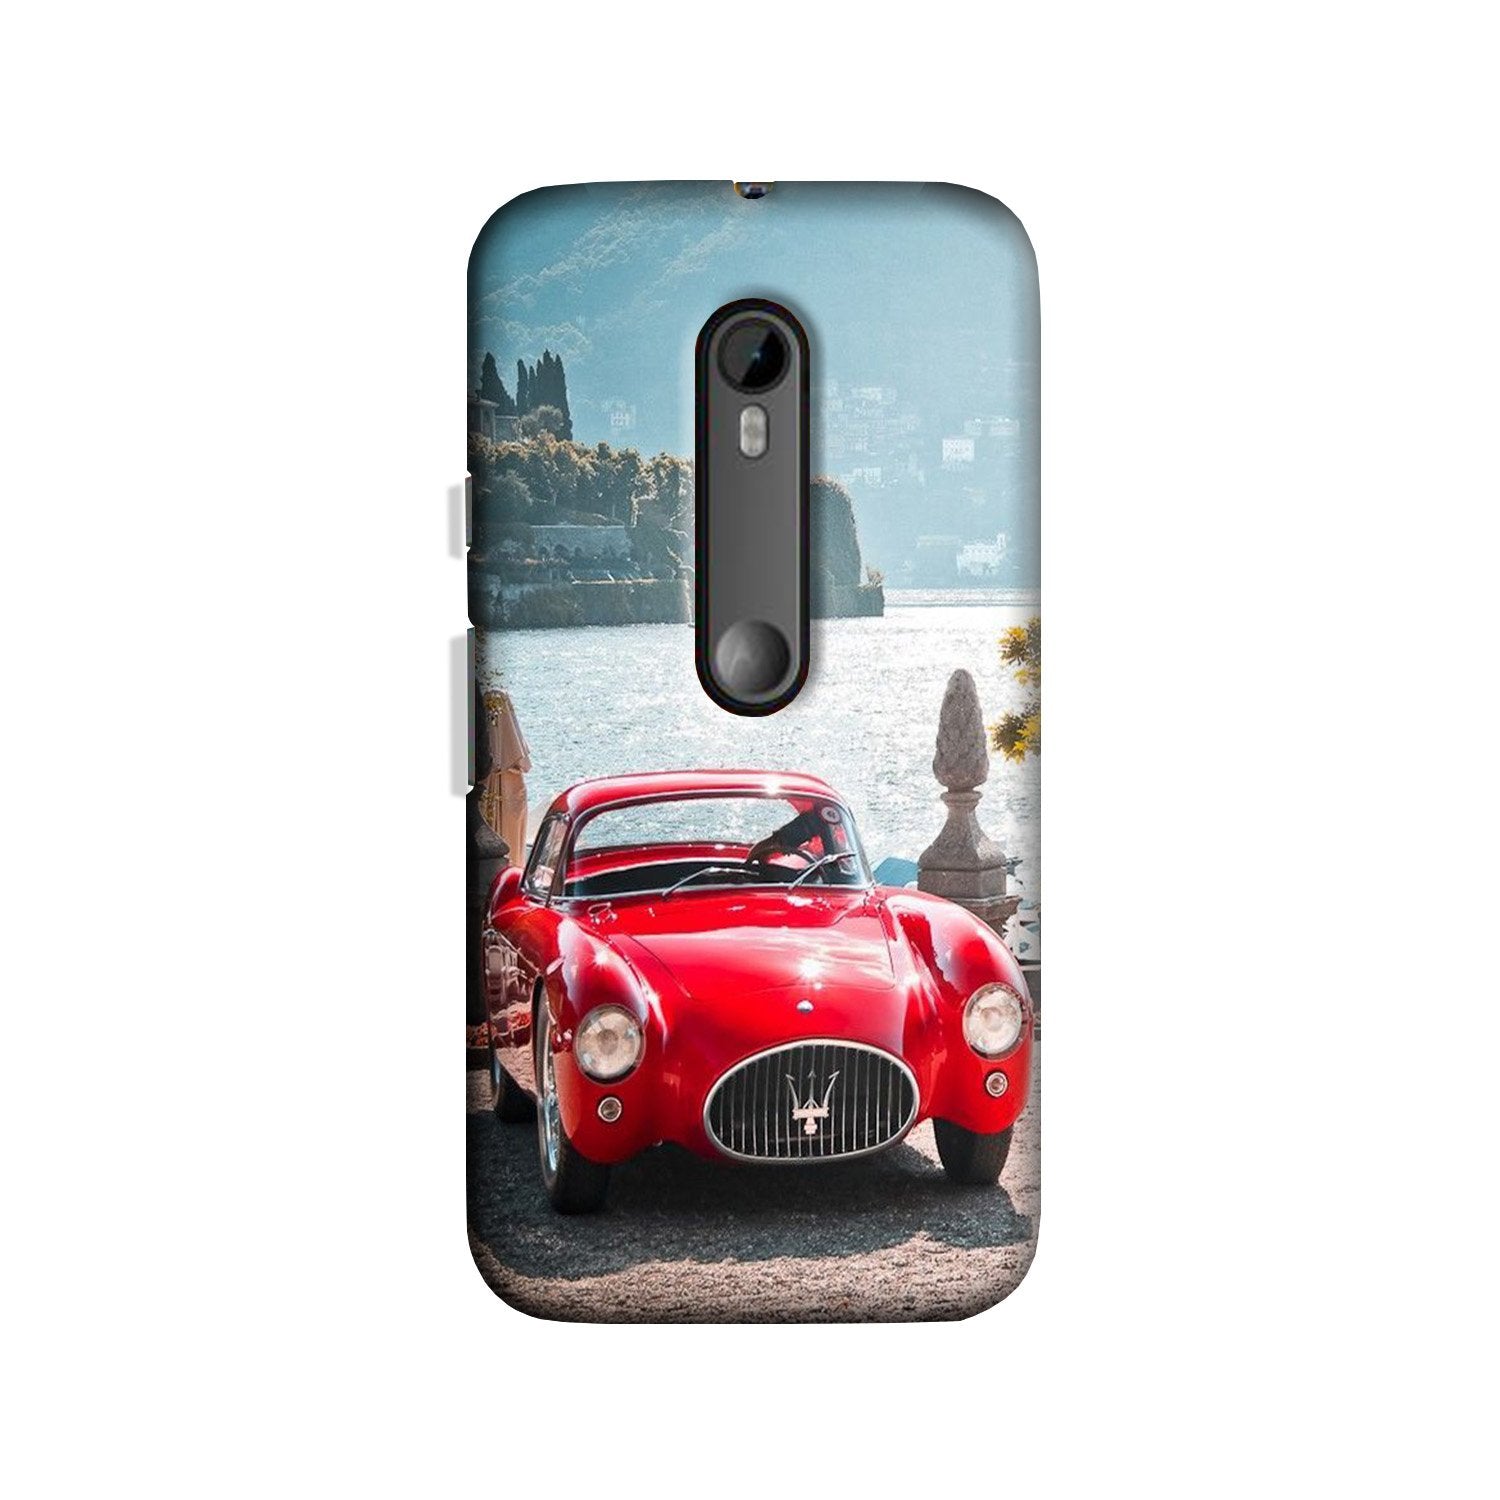 Vintage Car Case for Moto X Play